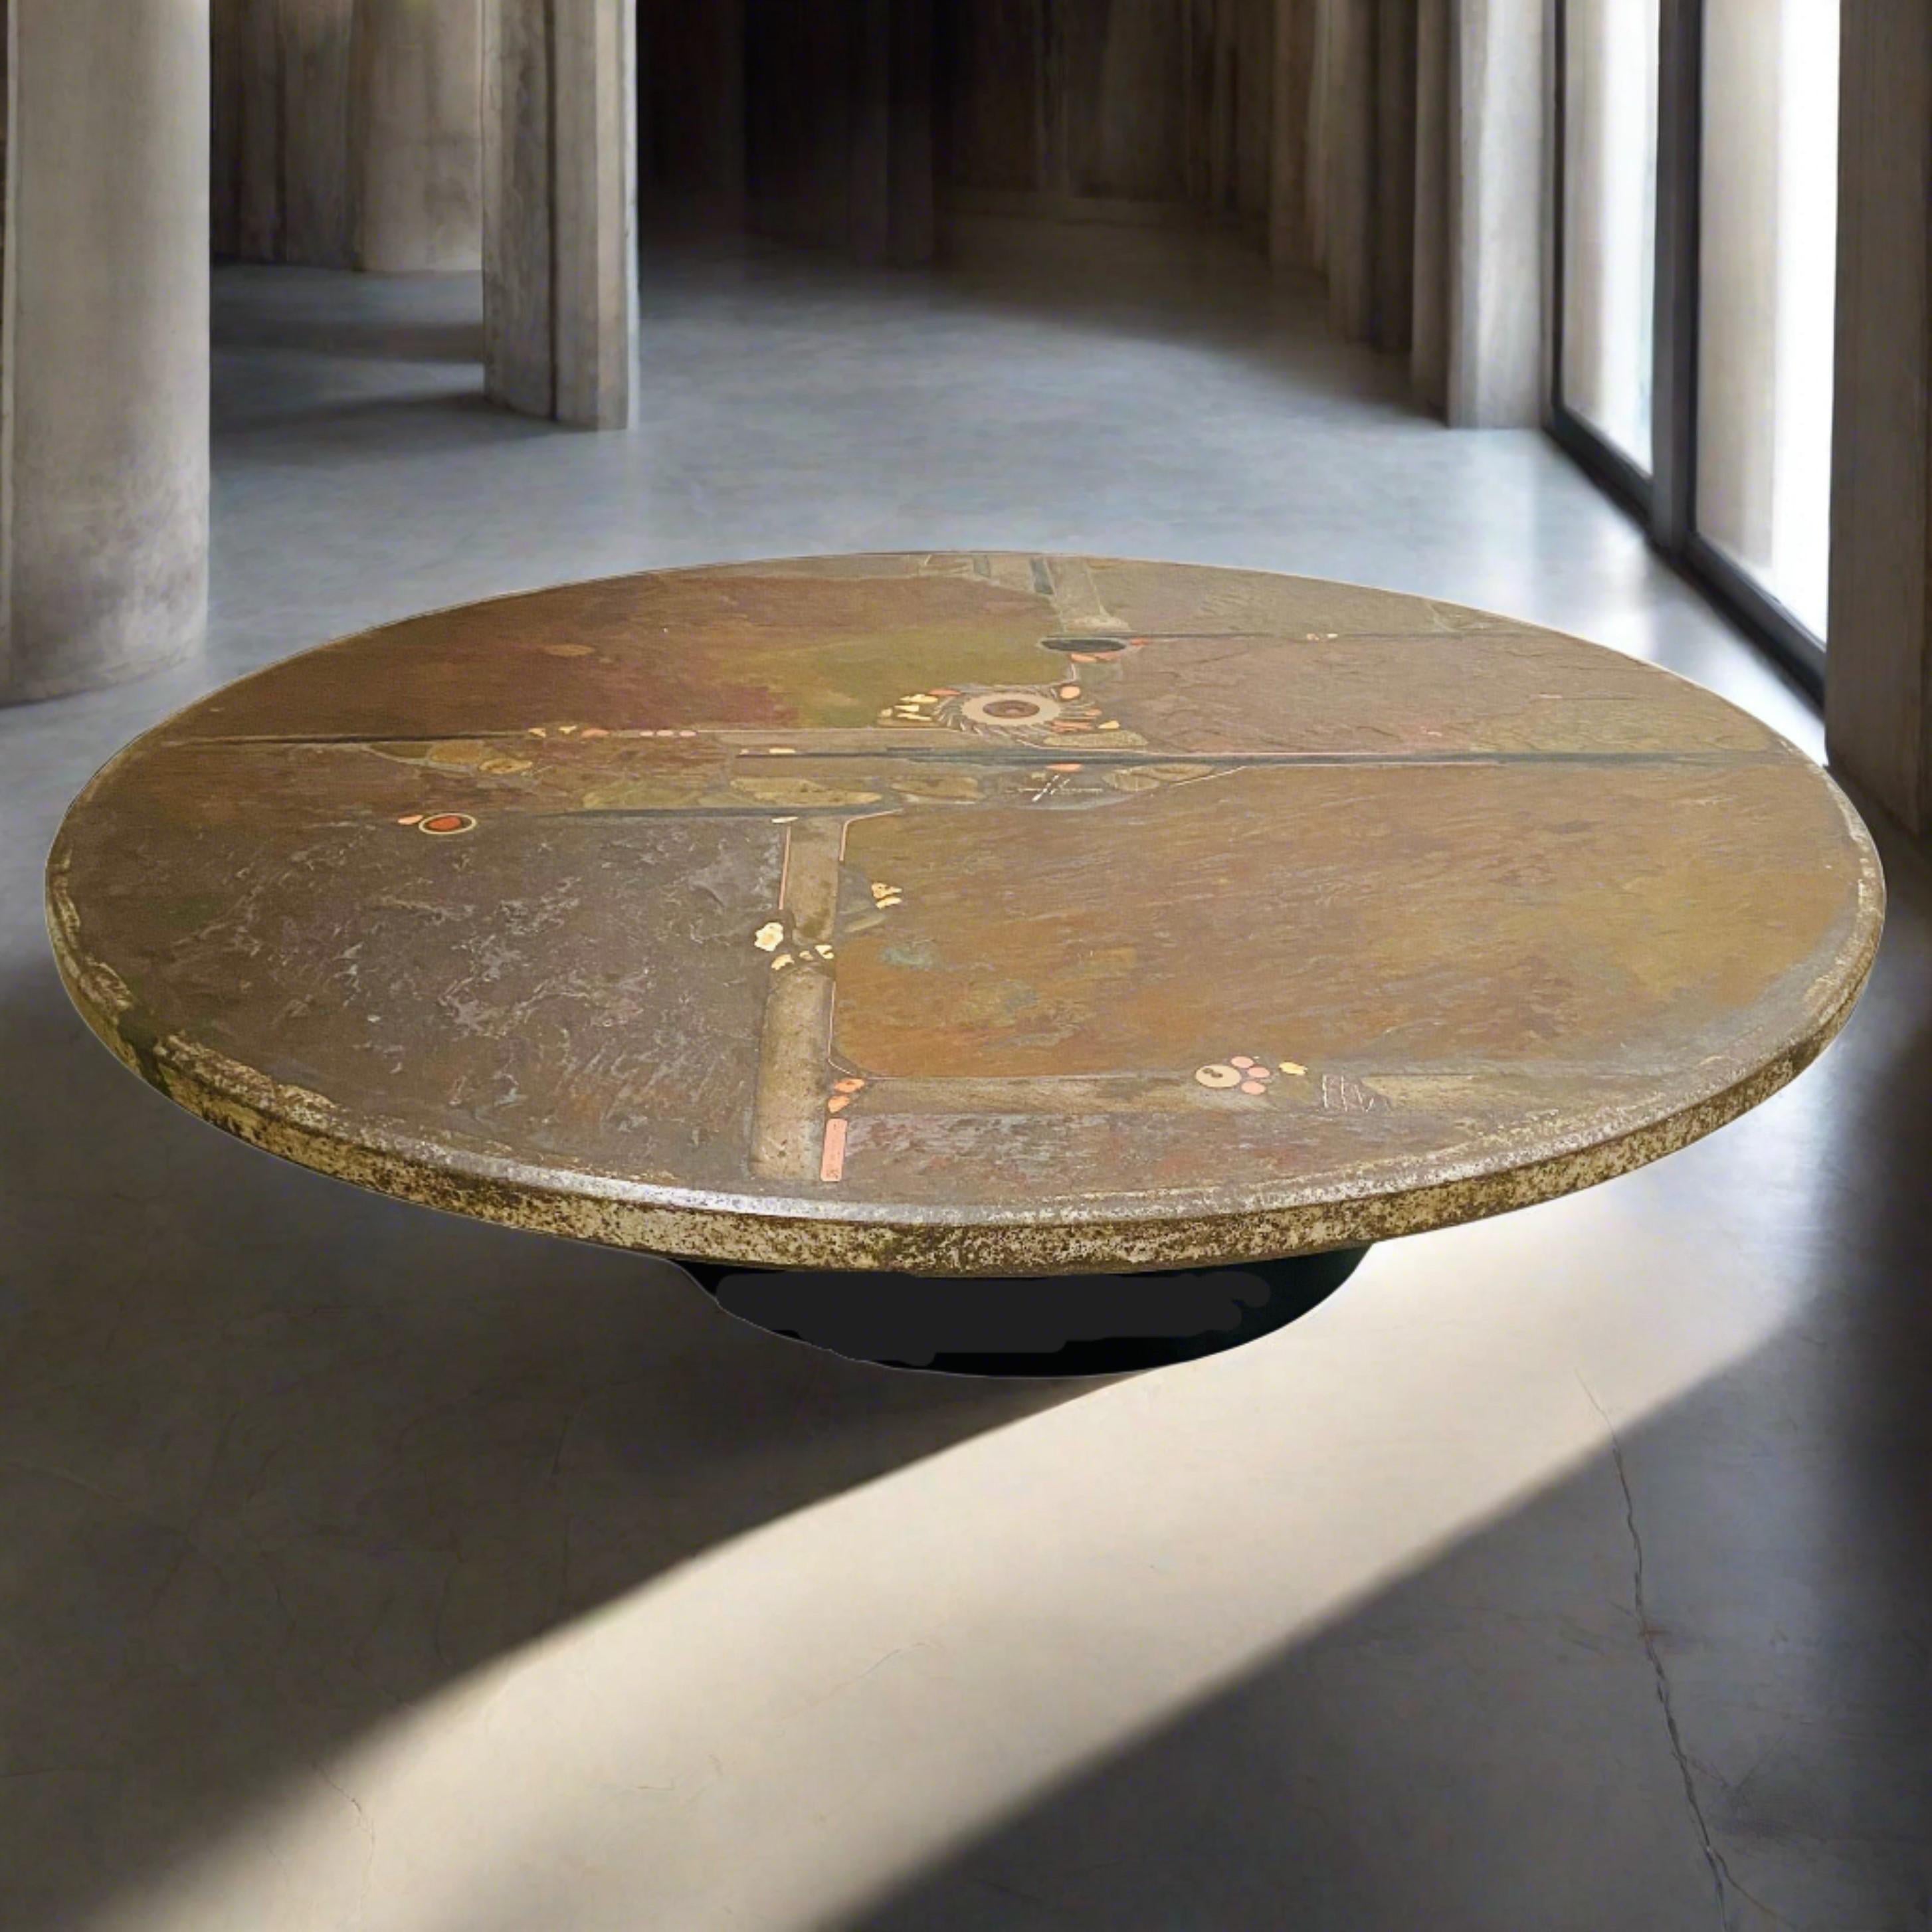 Dutch Brutalist Art Stone Round Coffee Table by Sculptor Paul Kingma Netherlands, 1985 For Sale